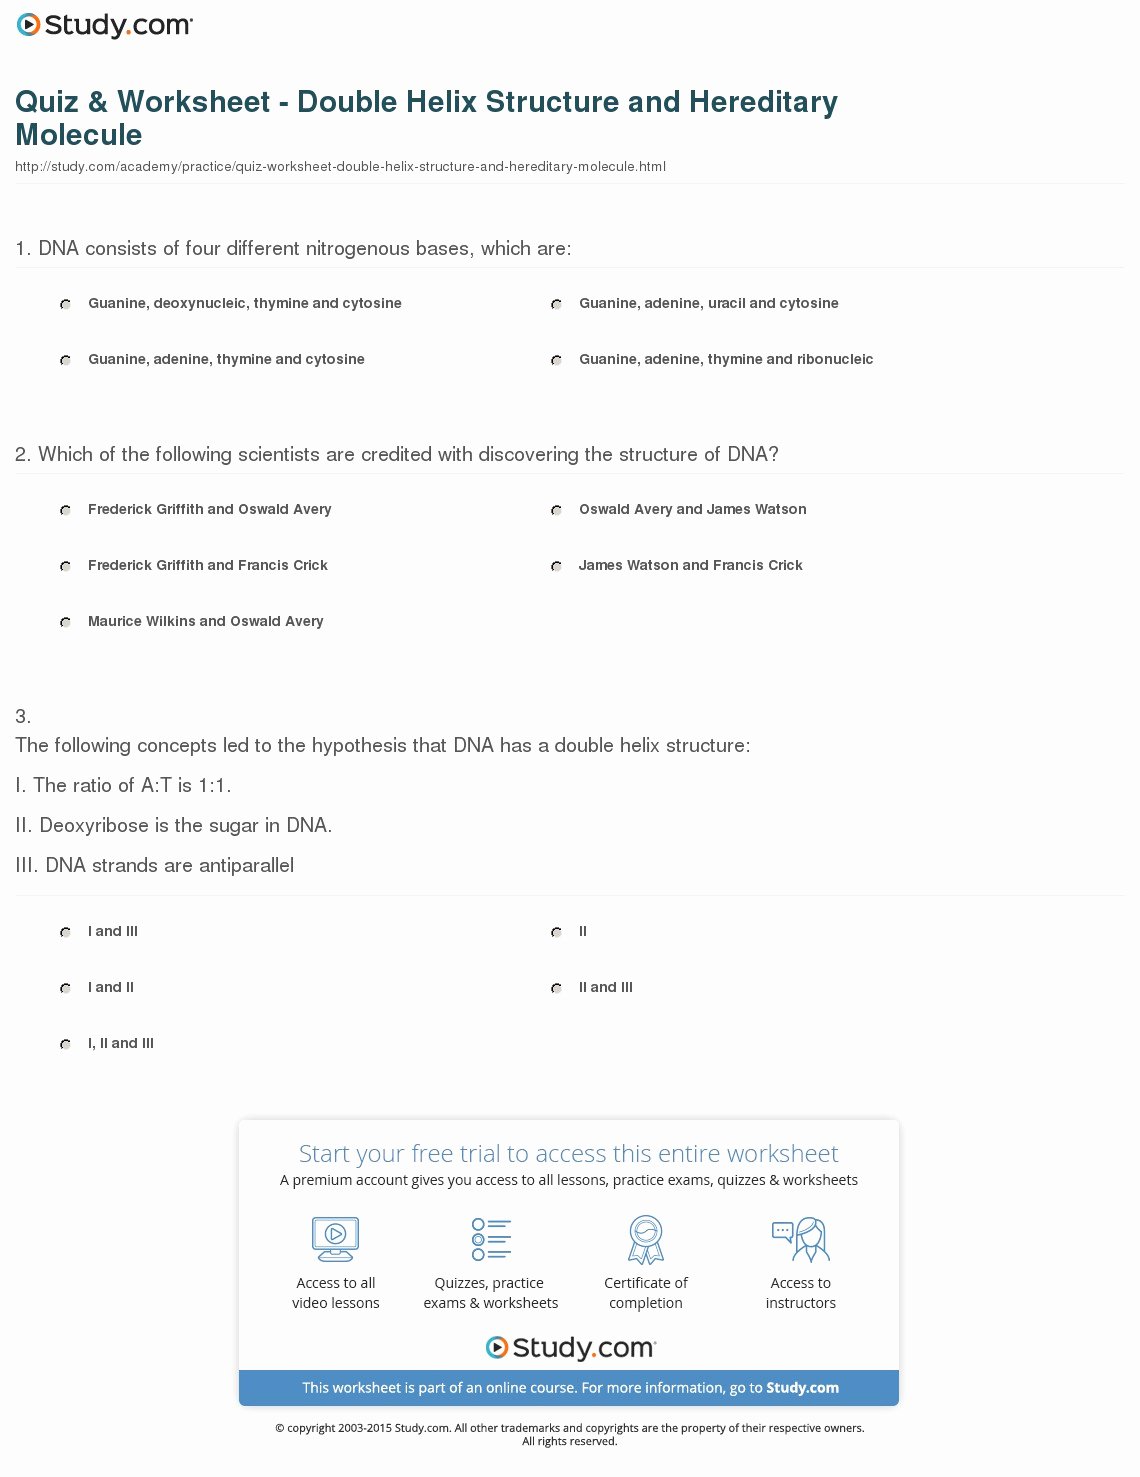 Dna the Double Helix Worksheet Inspirational Quiz &amp; Worksheet Double Helix Structure and Hereditary